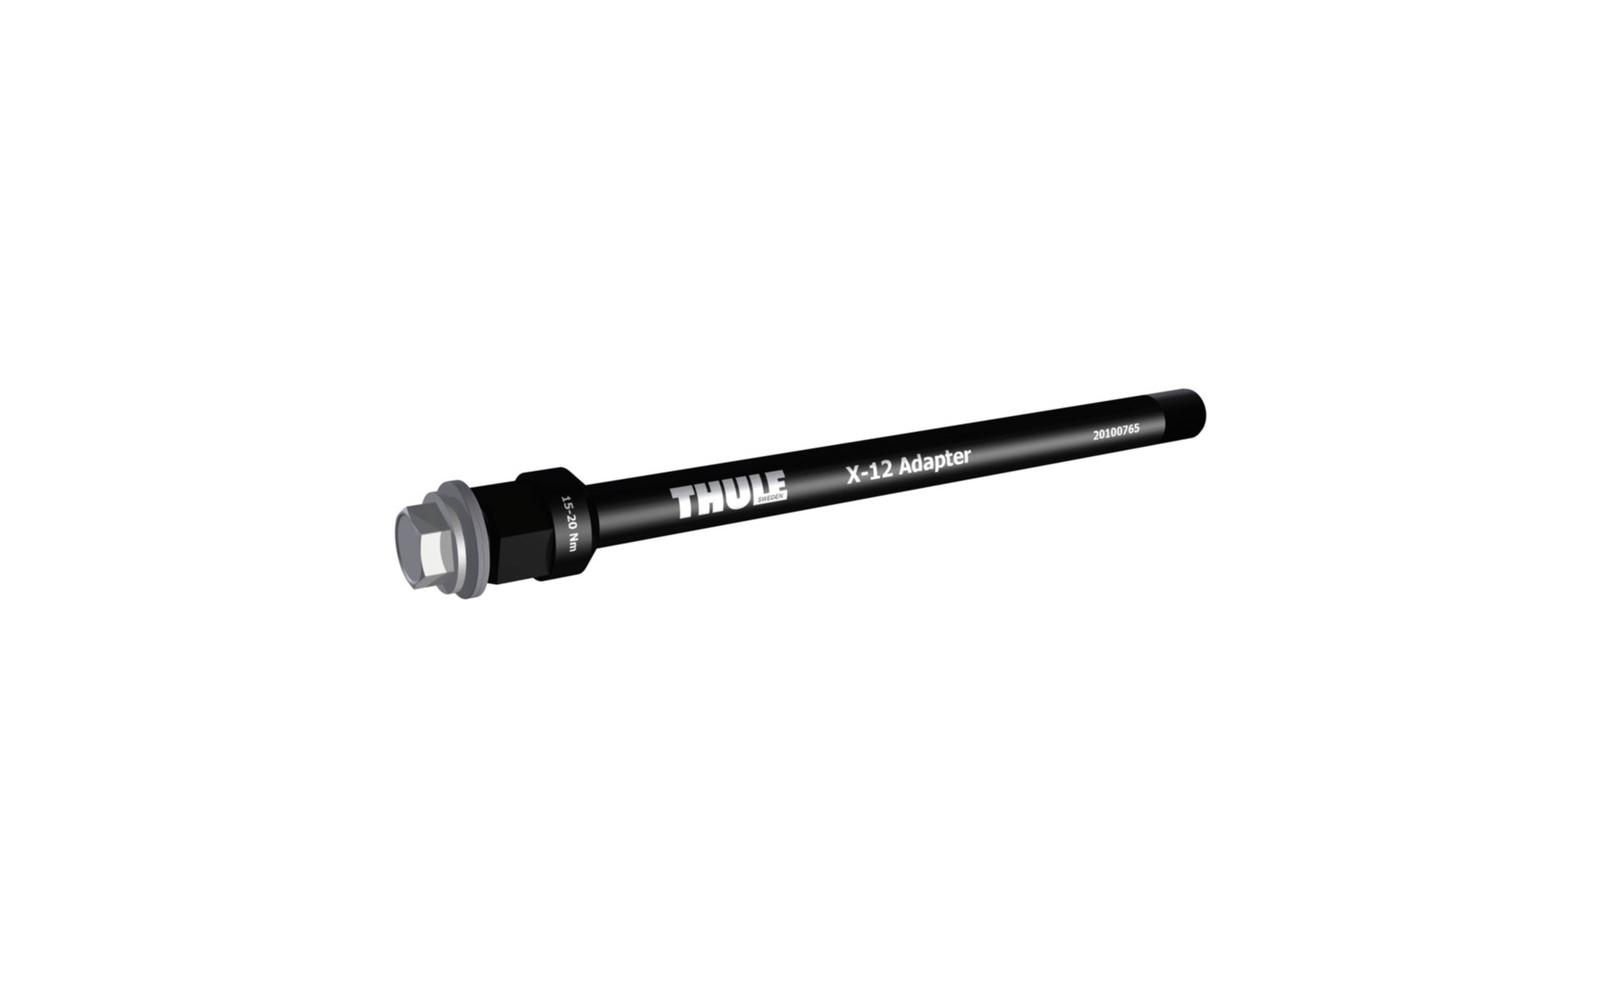 Thule Achsadapter Syntace X-12 142mm